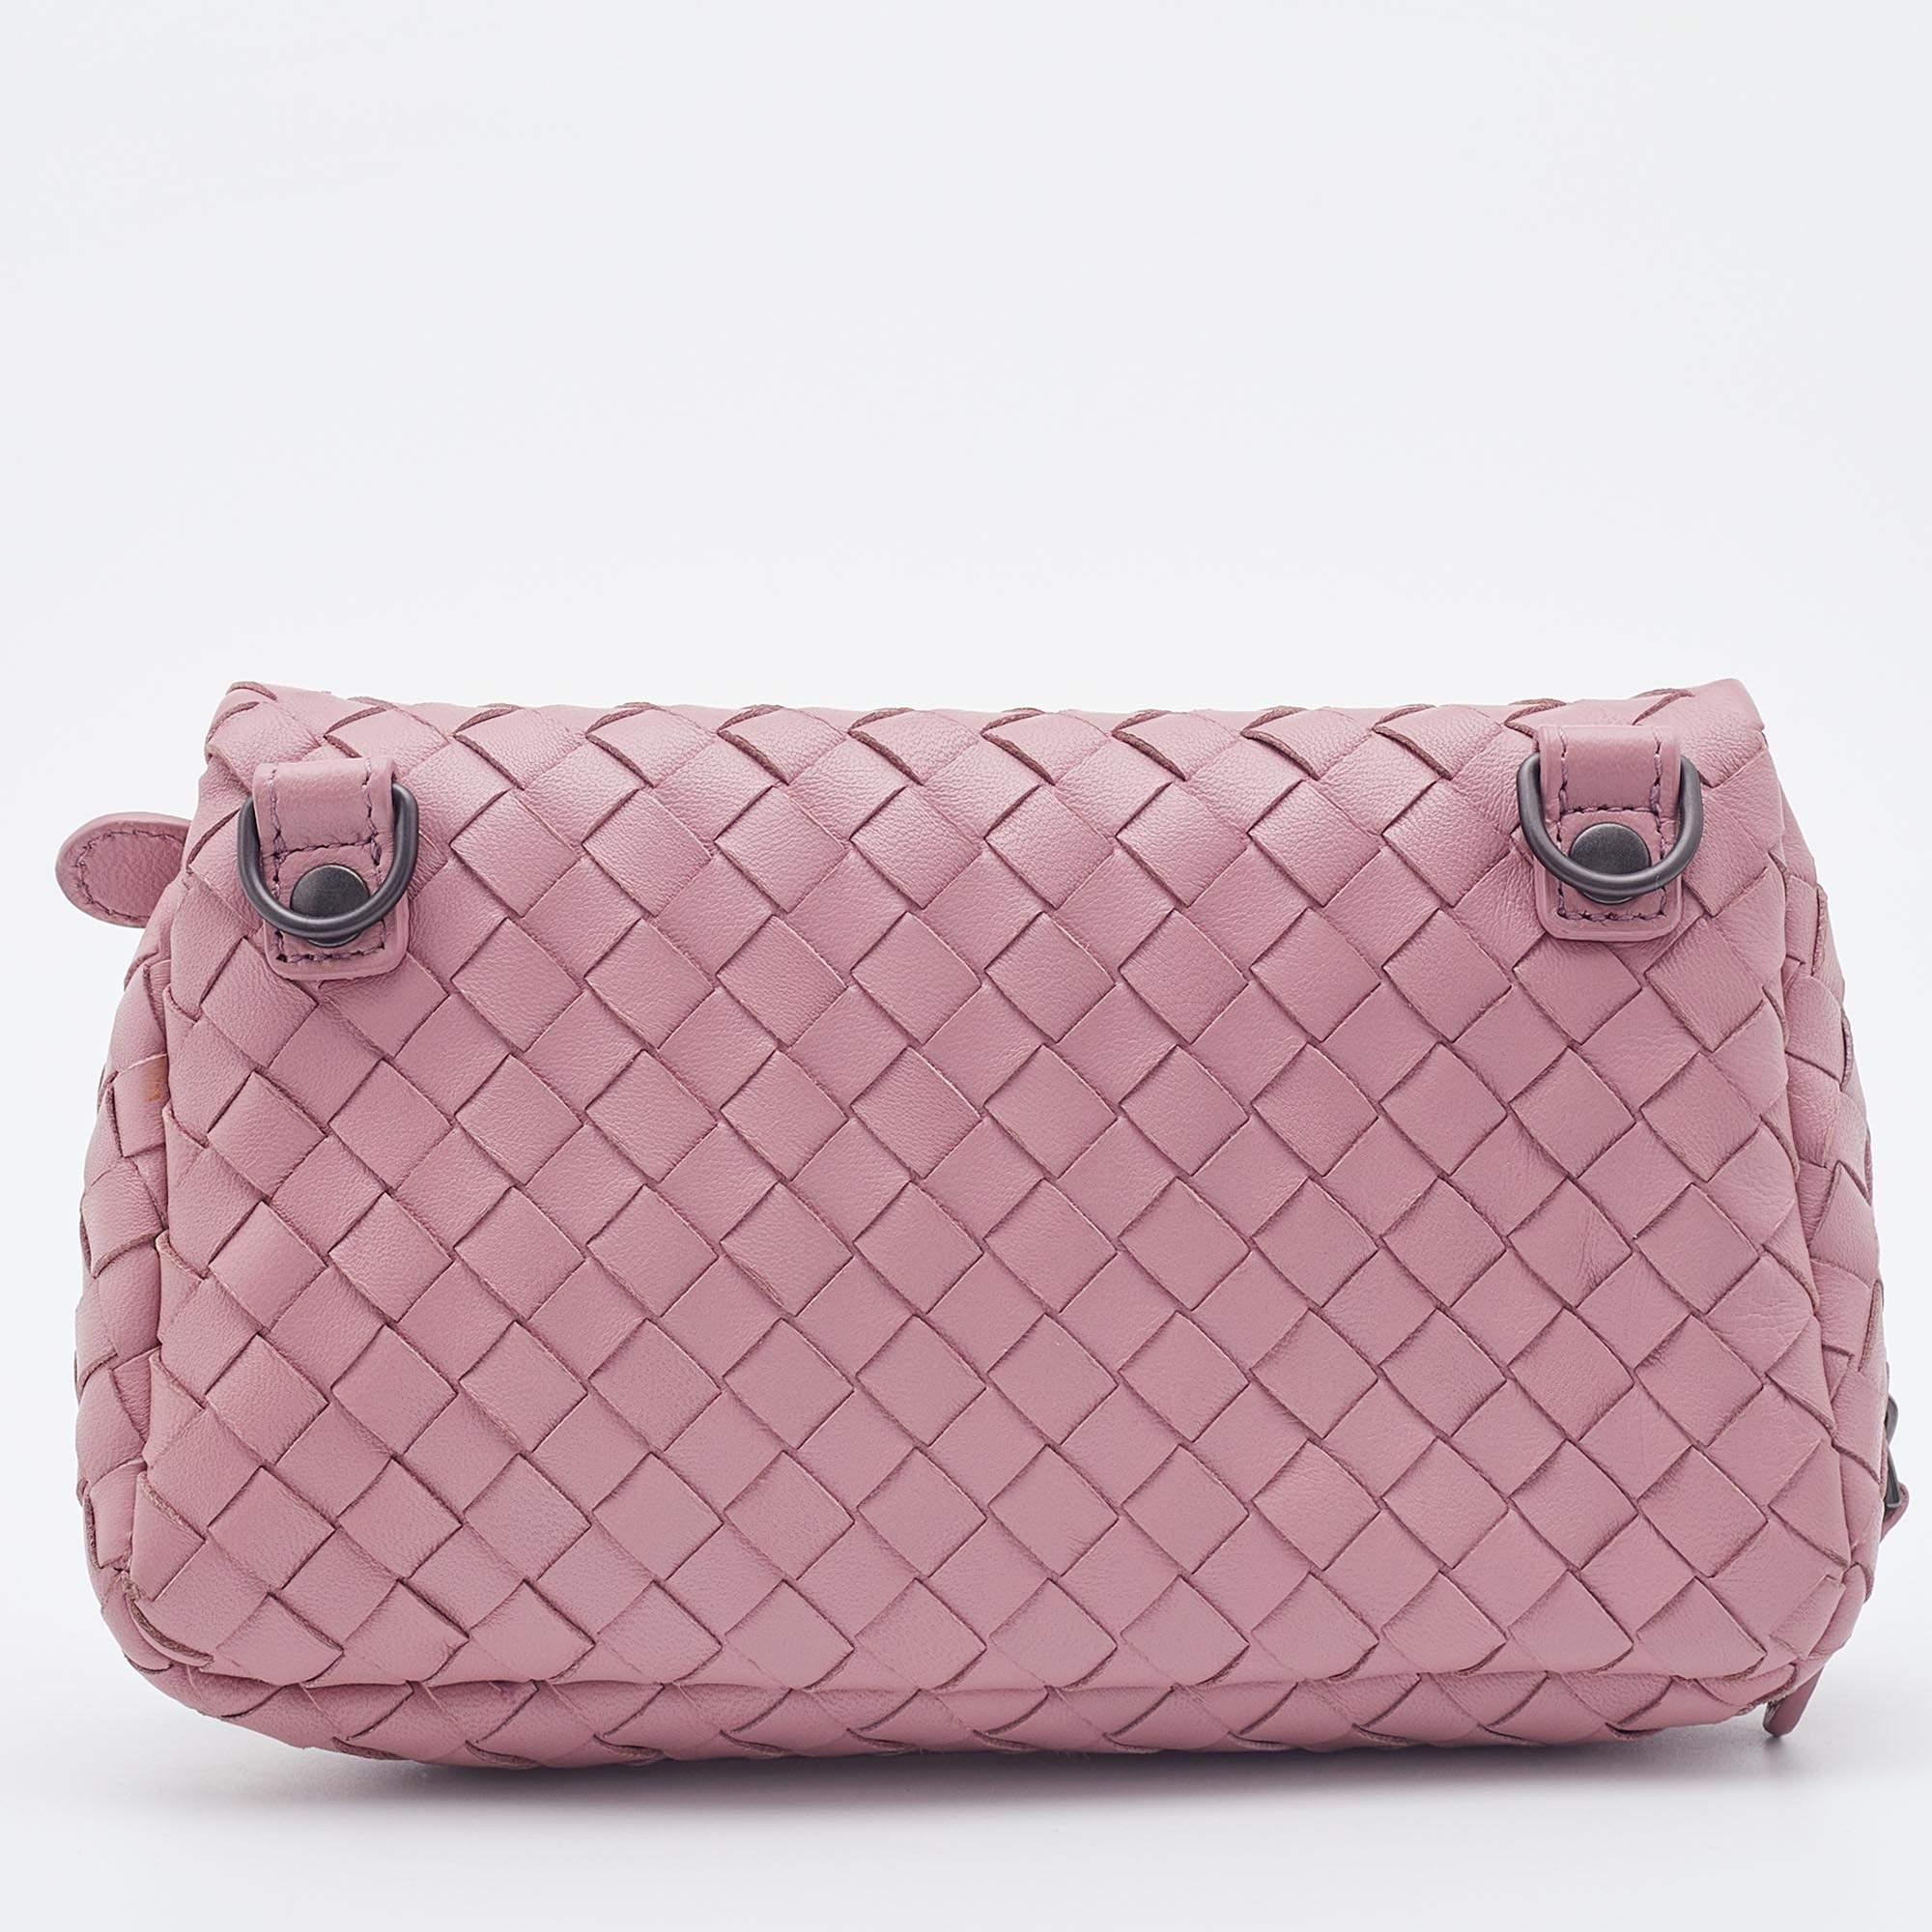 Named after the renaissance building 'Teatro Olimpico,' the Bottega Veneta Olimpia bag reflects the brand's faultless weaving technique. This light pink creation comes made from Intrecciato leather and can be carried by a shoulder strap. Lined with